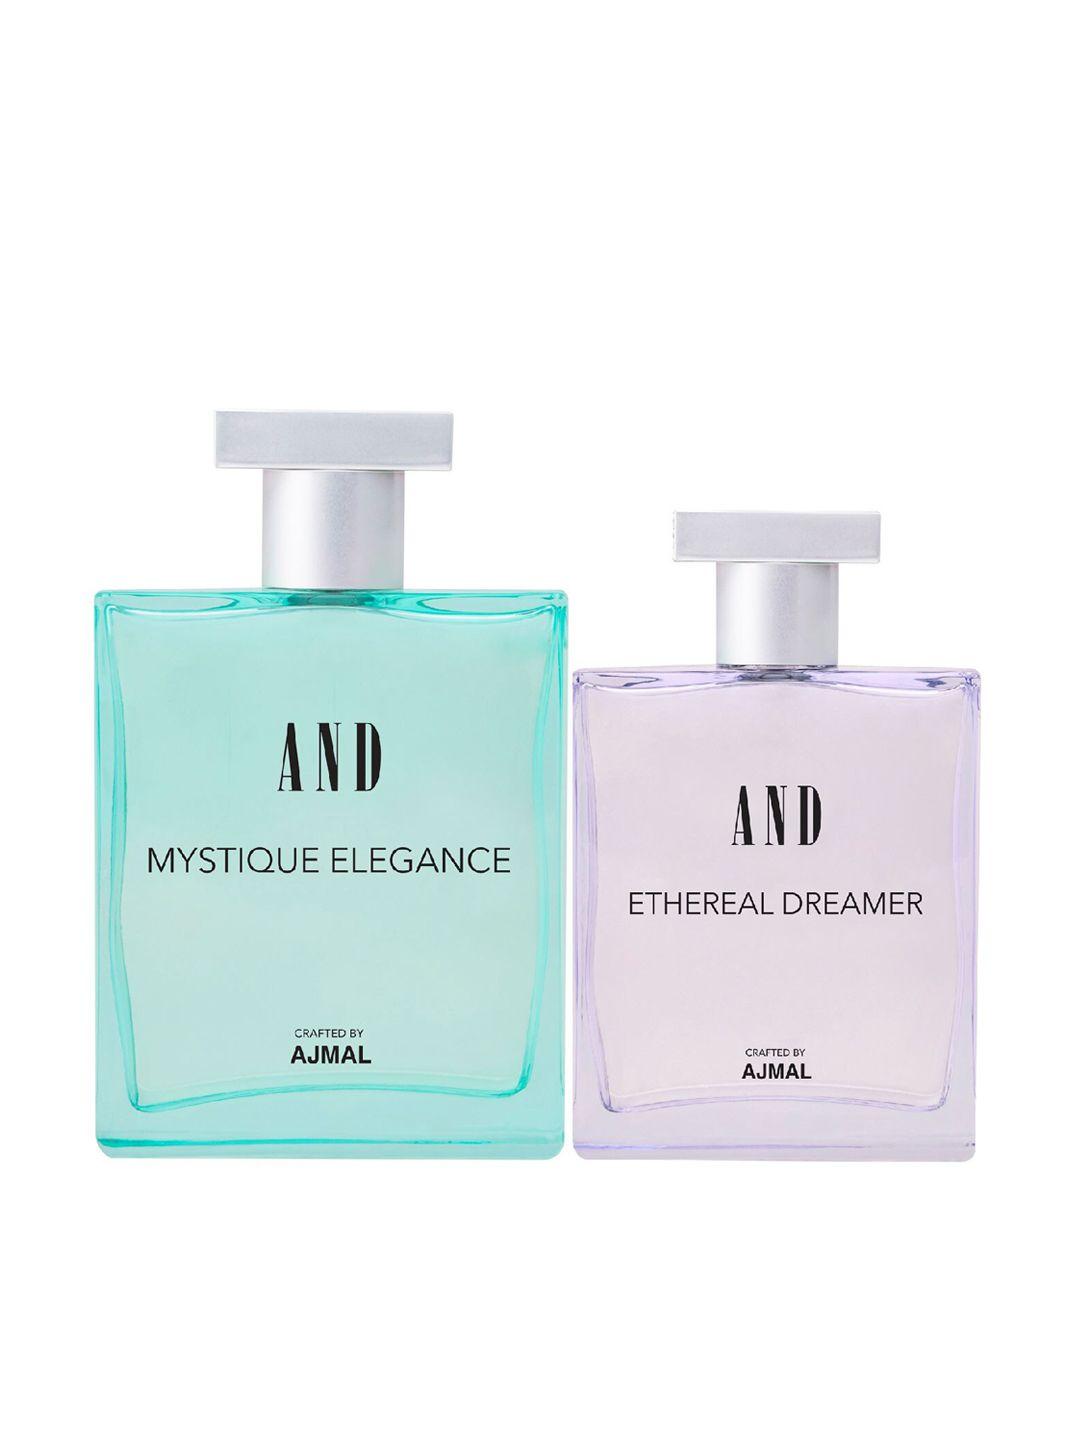 and set of 2 mystique elegance edp & ethereal dreamer edp - crafted by ajmal